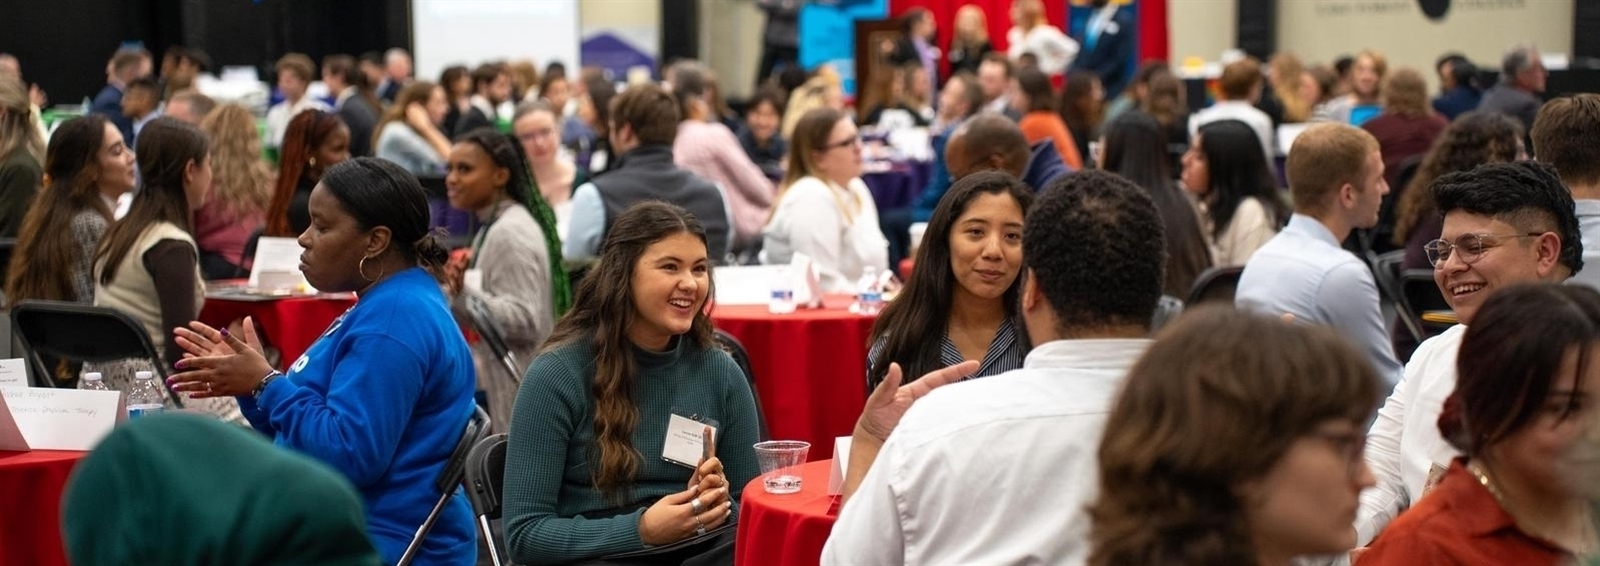 students and professionals at speed networking